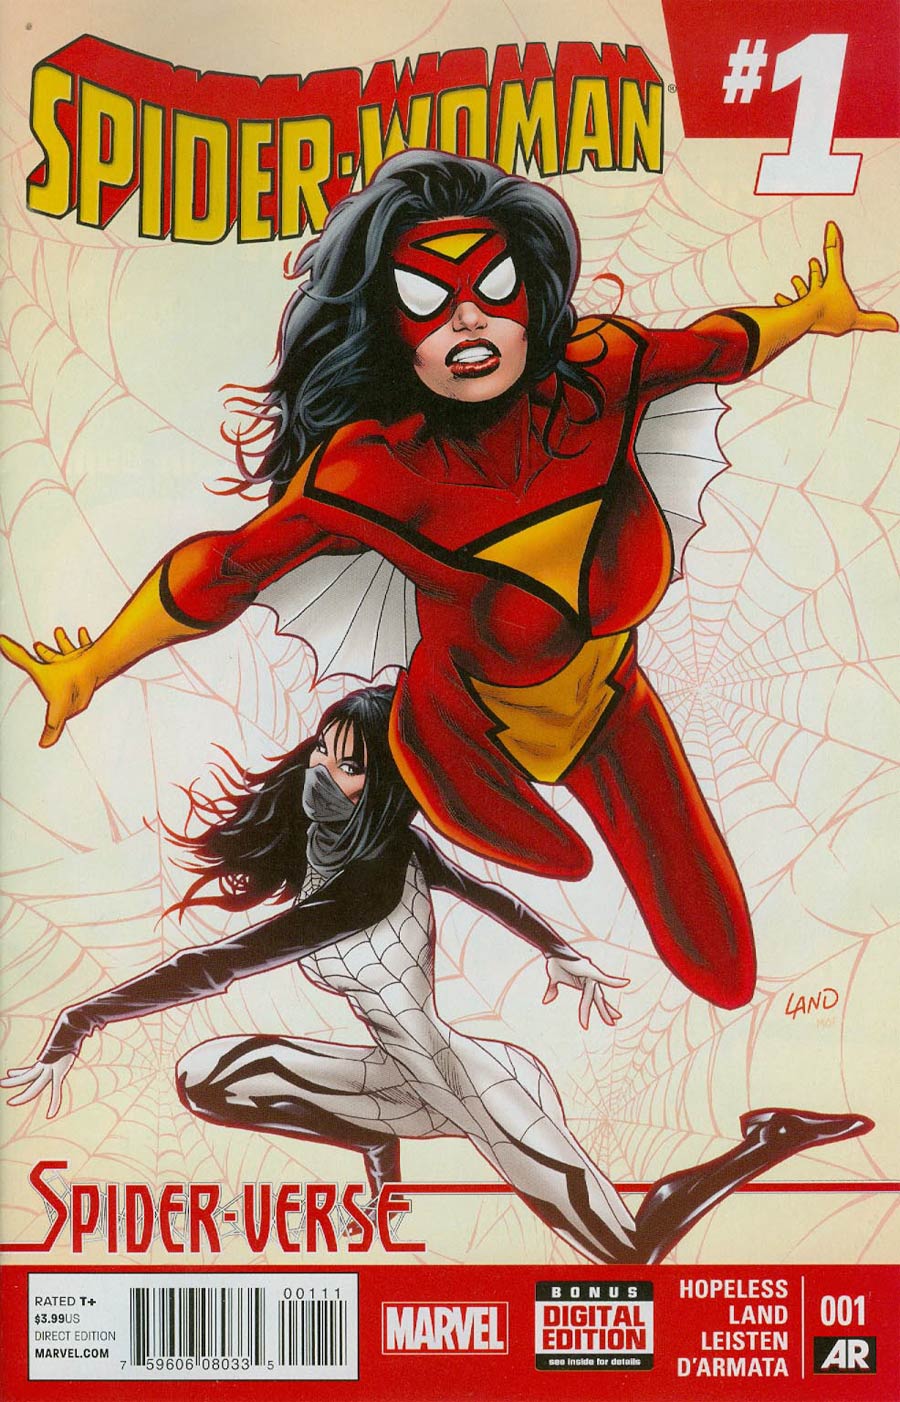 Spider-Woman Vol 5 #1 Cover A 1st Ptg Regular Greg Land Cover (Spider-Verse Tie-In)